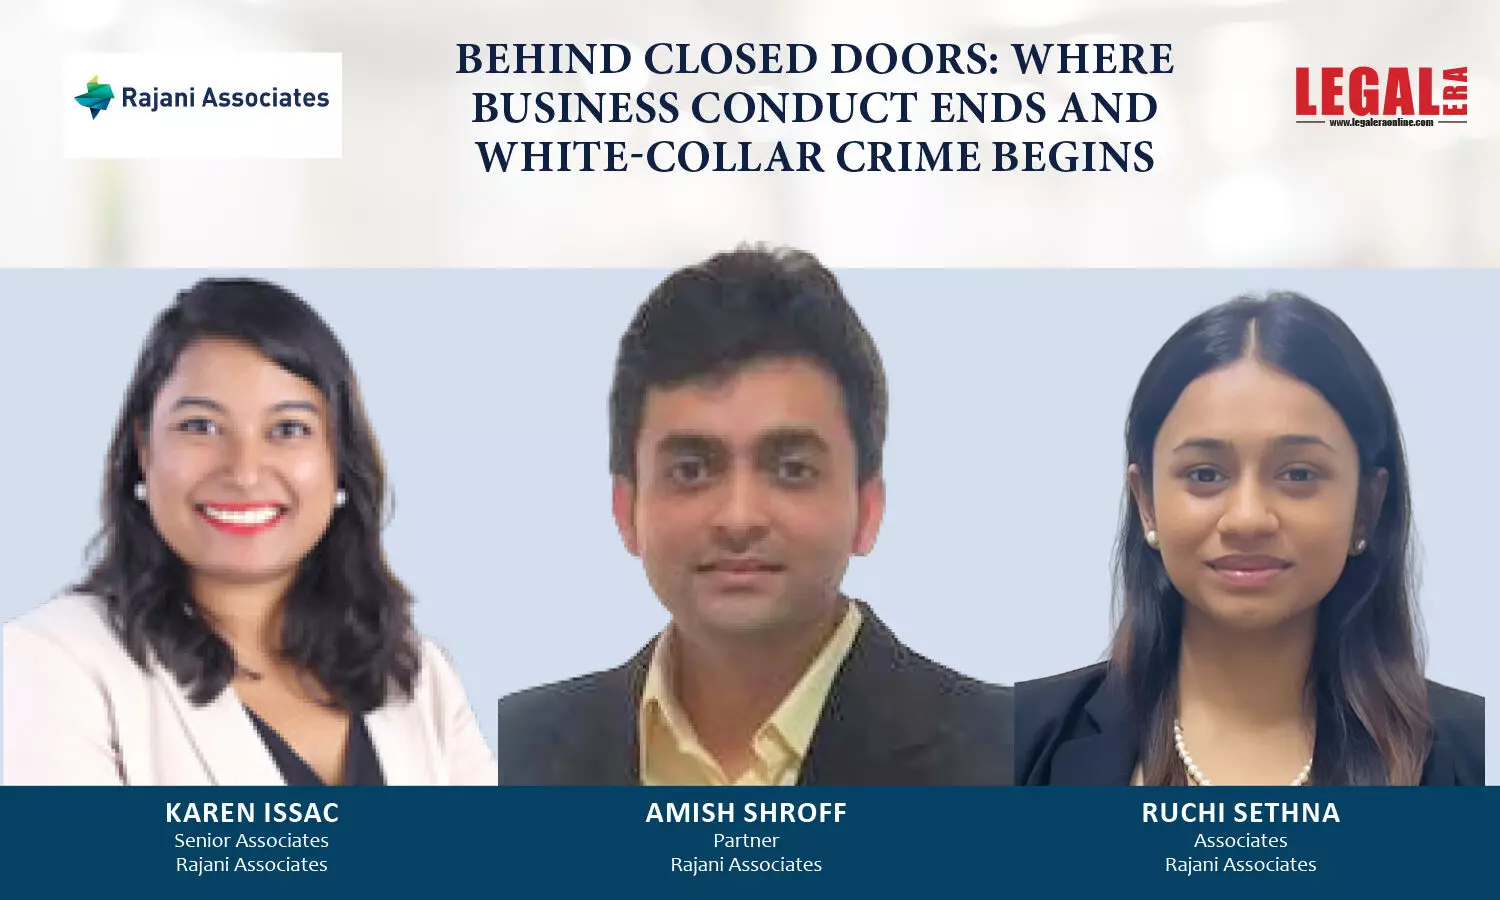 Behind Closed Doors: Where Business Conduct Ends And White-Collar Crime Begins